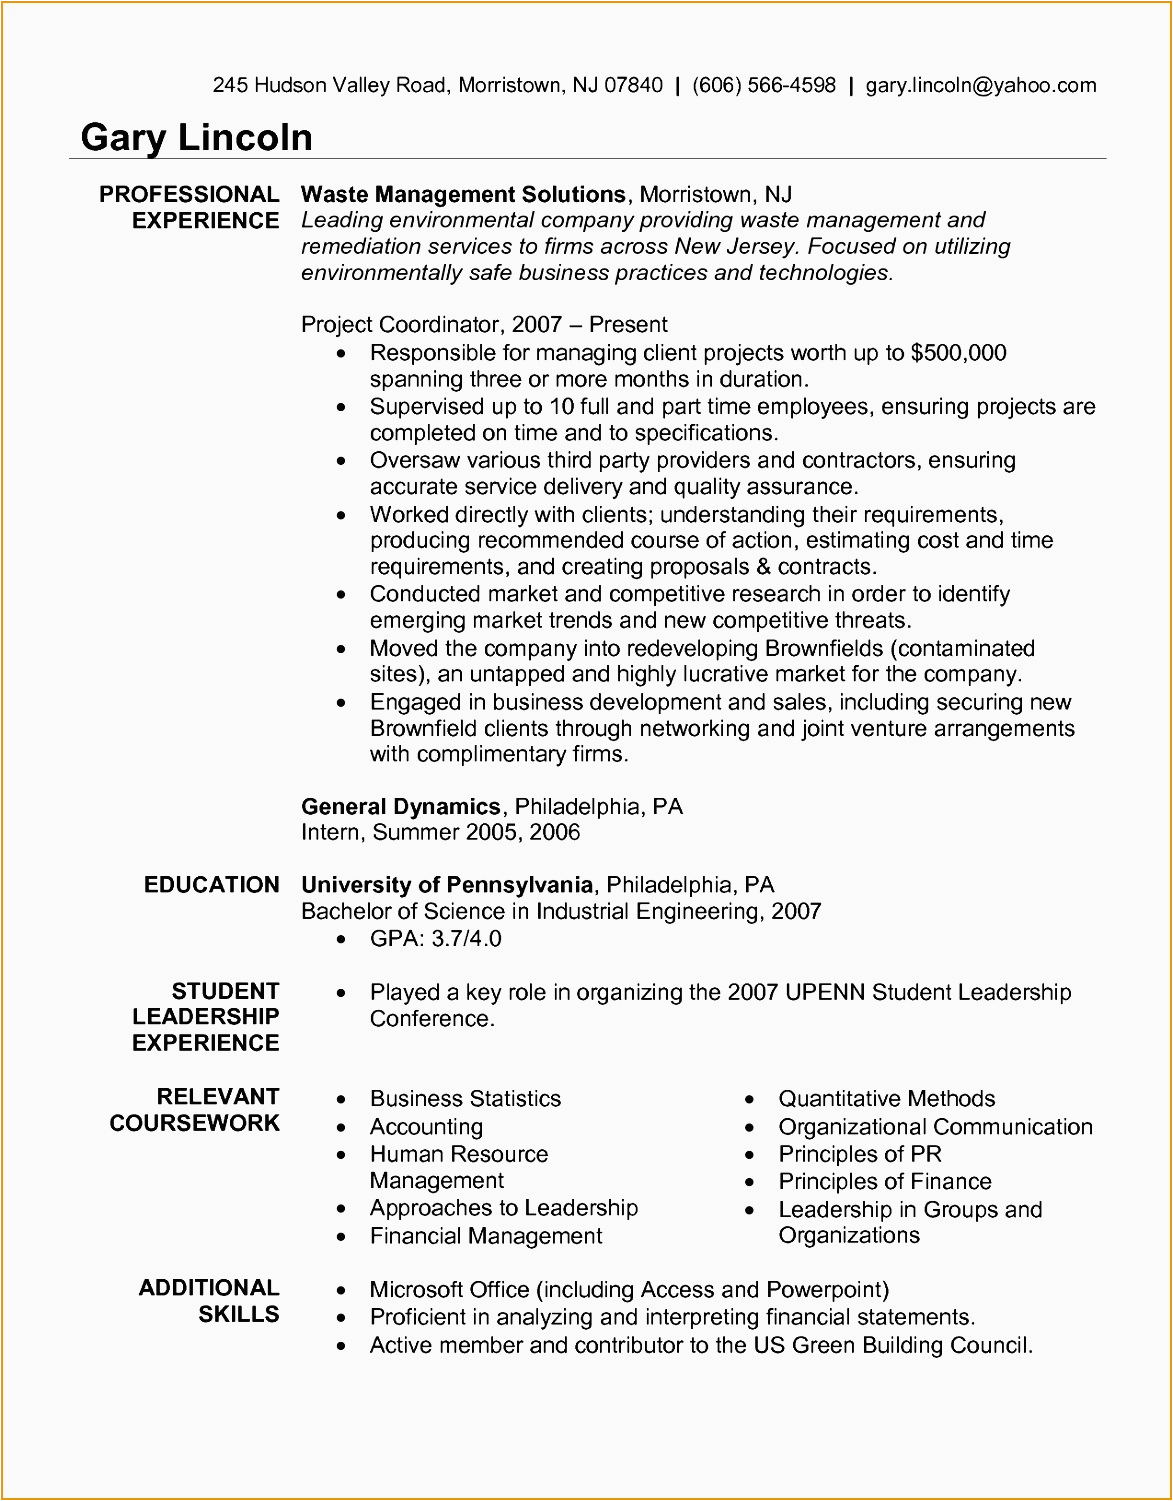 Sample Resume for Waste Management Job 9 Manufacturing Engineer Resume Free Samples Examples